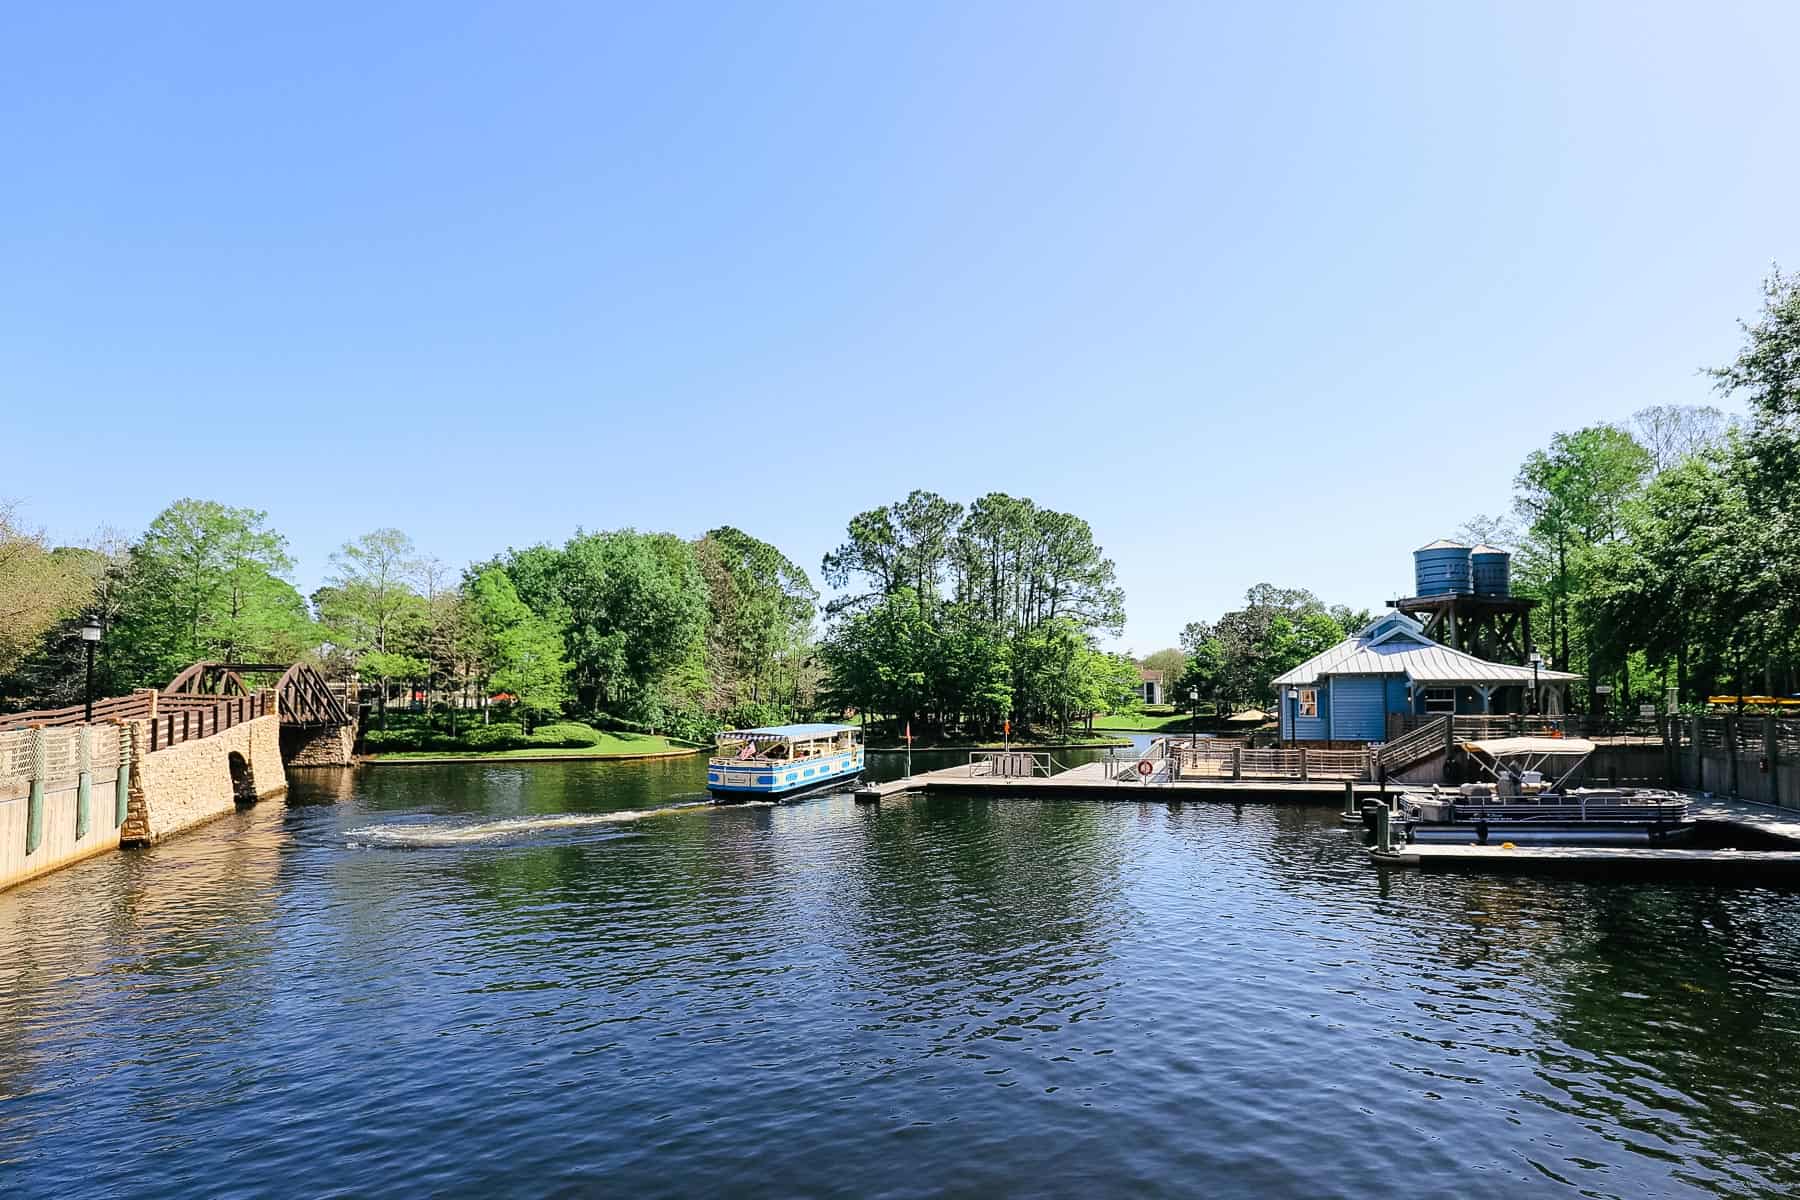 a water taxi is departing Port Orleans Riverside on the way to Port Orleans French Quarter